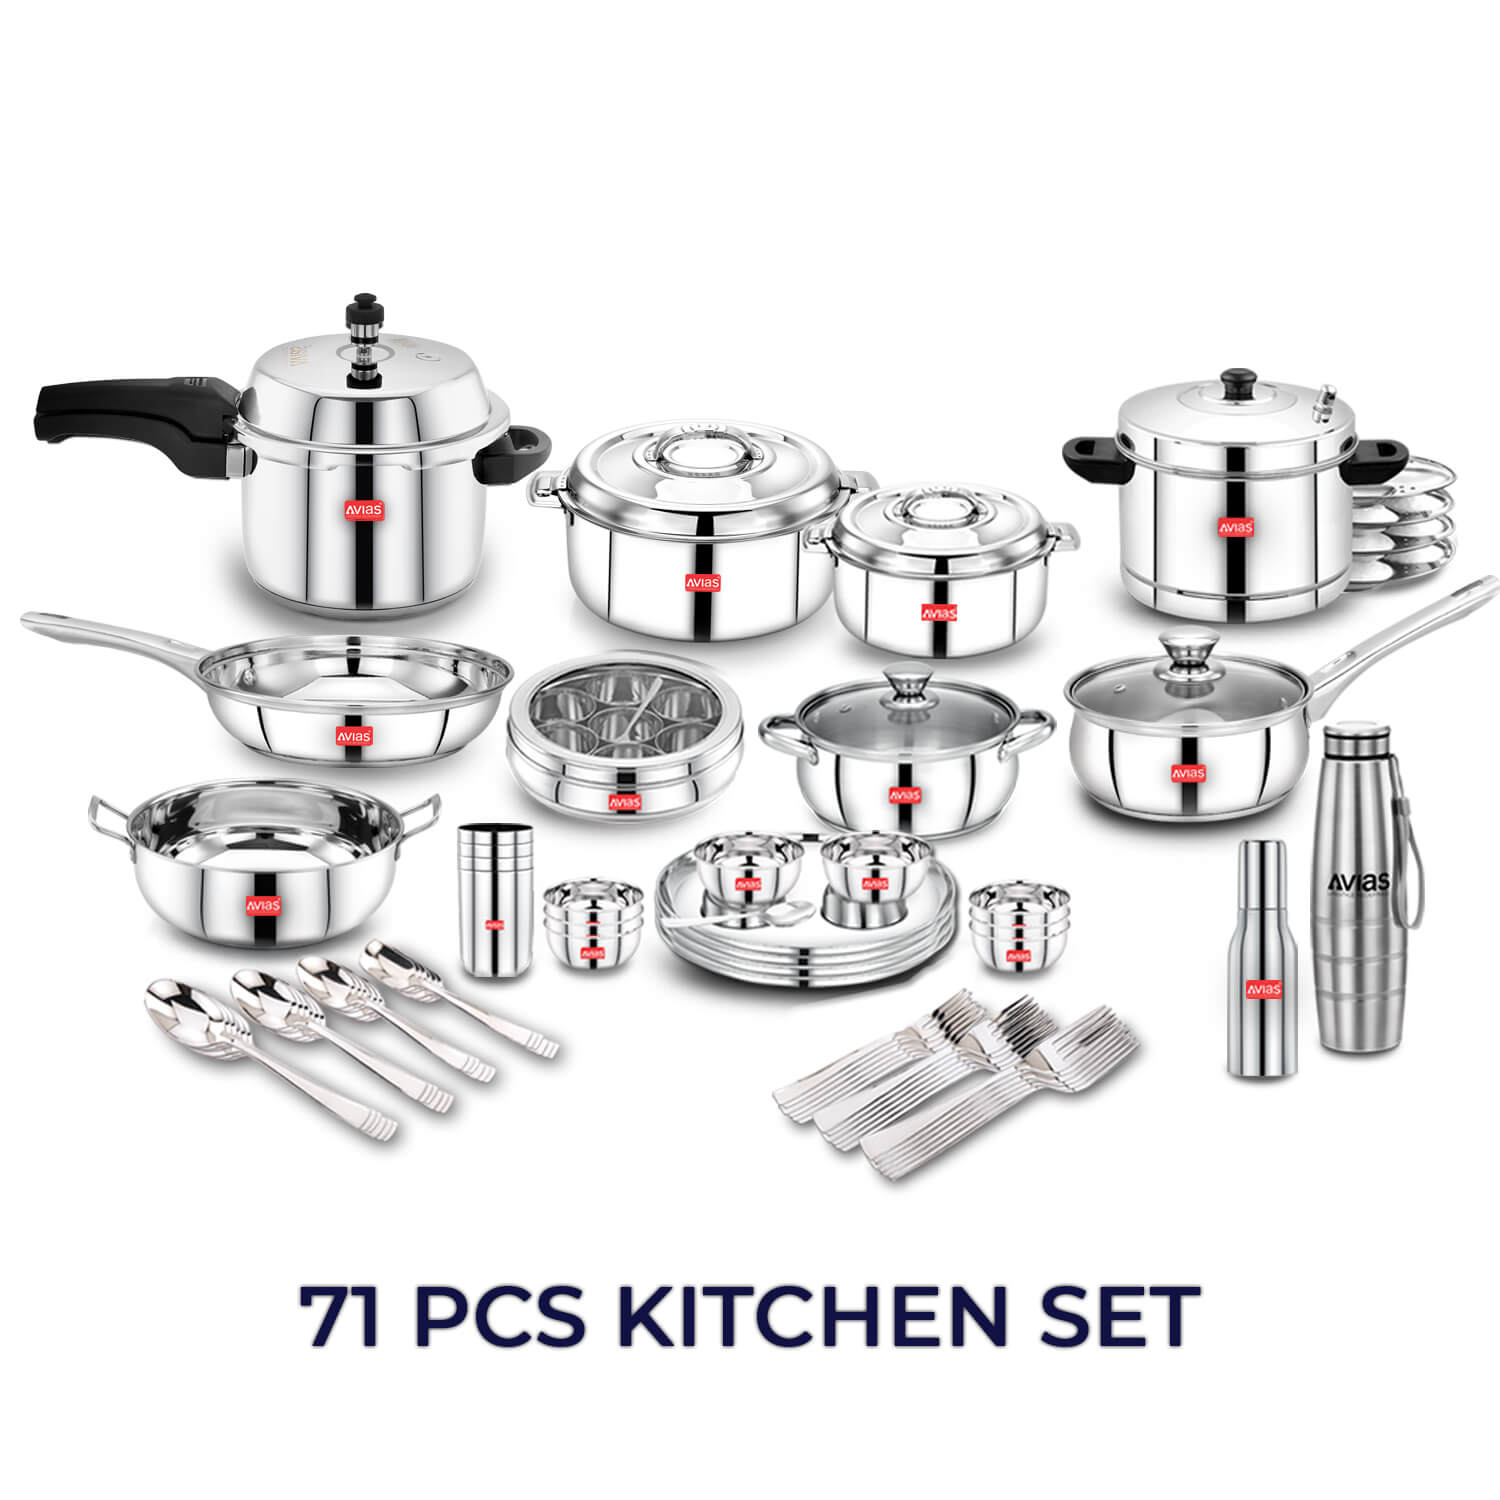 Stainless Steel 71 PCS Kitchen Set | Standard | High Grade And Premium Quality Stainless Steel